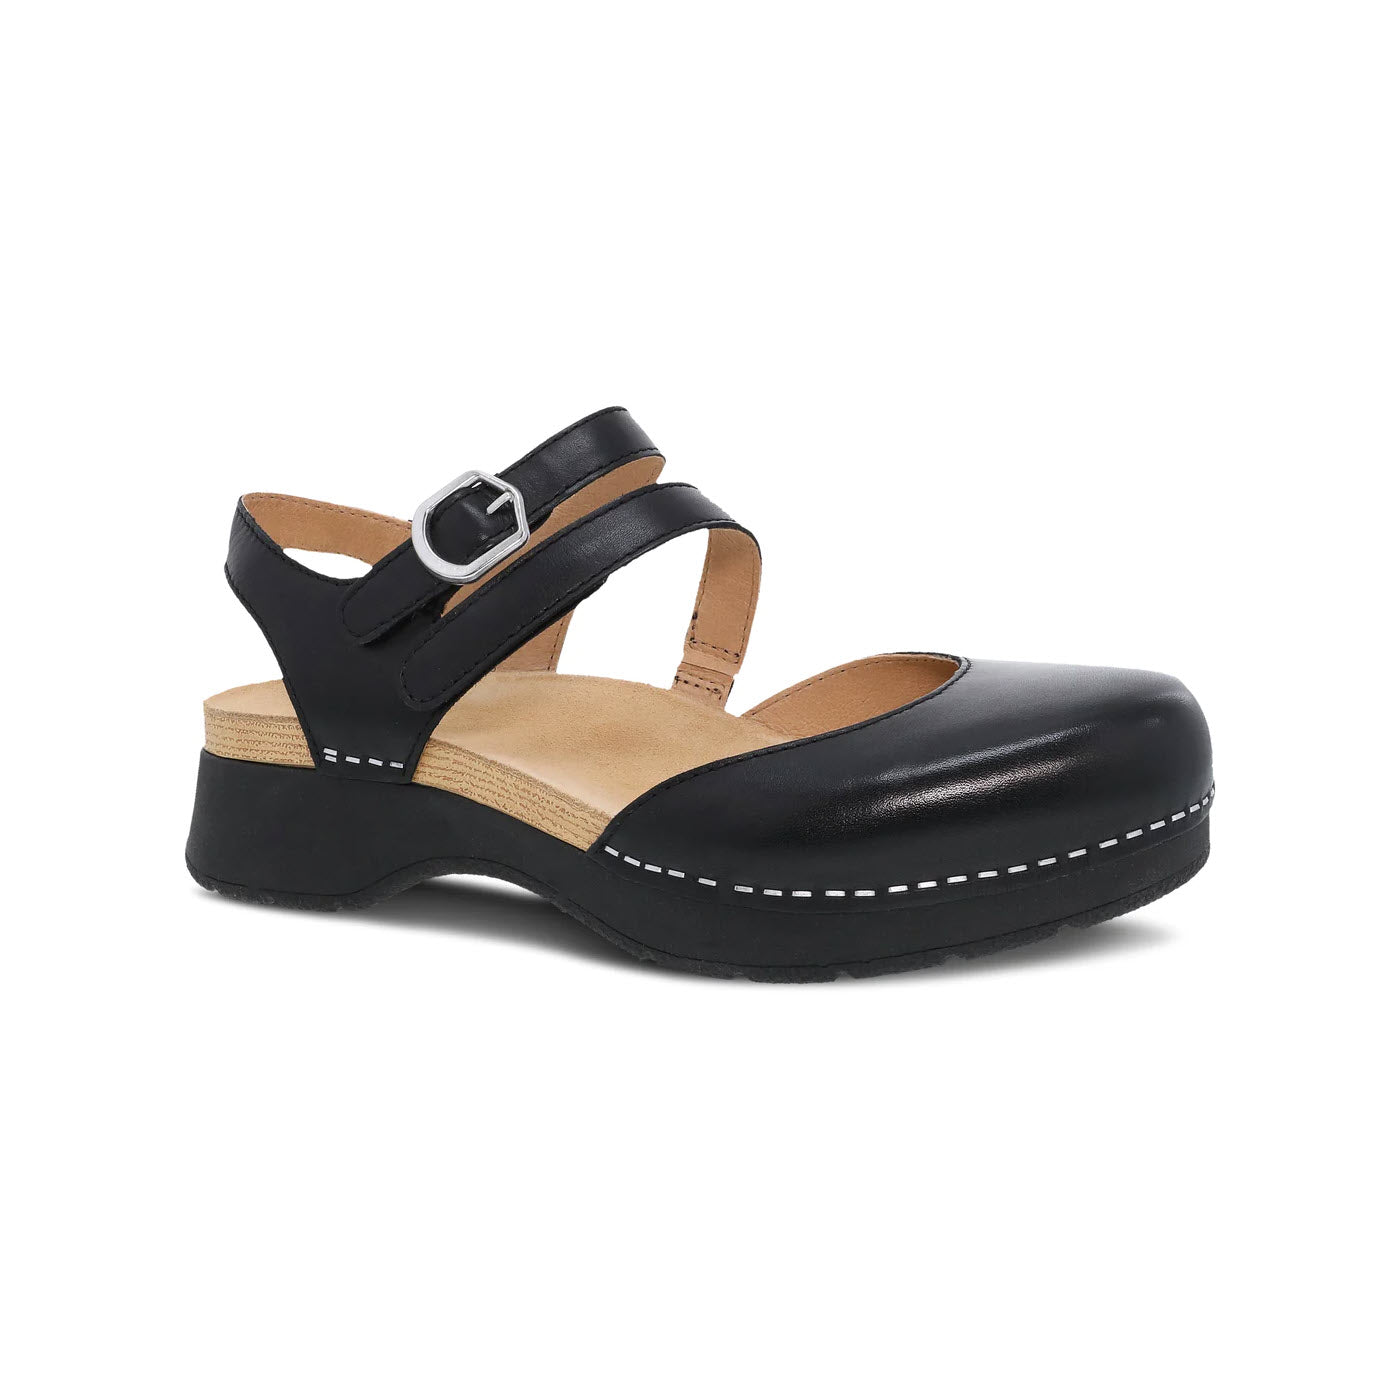 Dansko Rissa Black - Womens leather clog with a closed toe style, an adjustable back strap, and wooden sole, profile view on a white background.